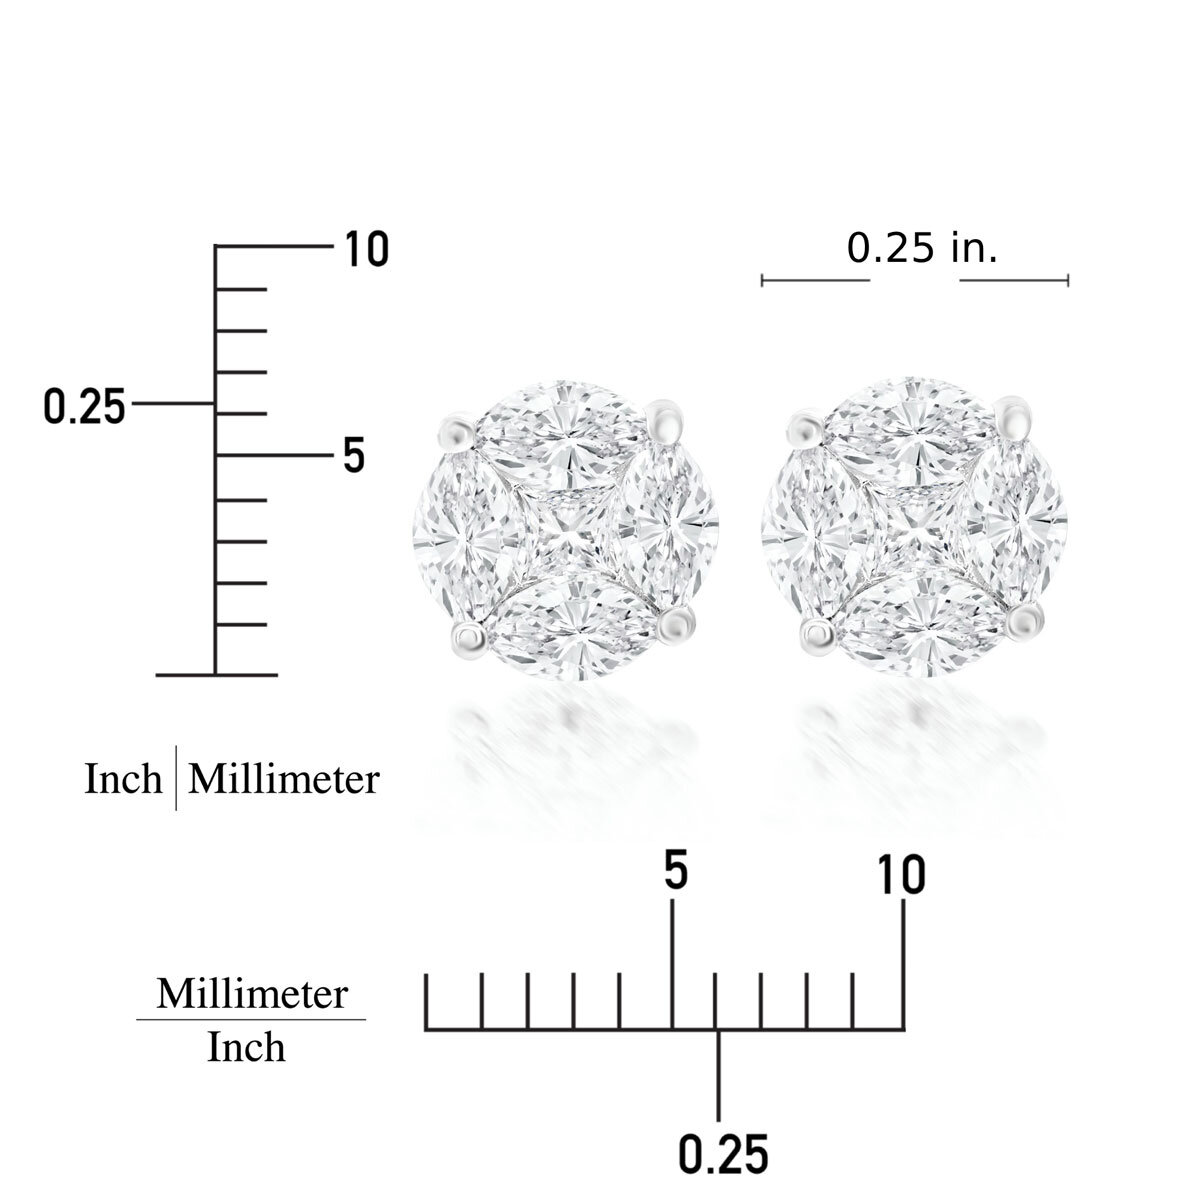 1.00ctw Marquise and Princess Cut Diamond Multi Stone Earrings, 18t White Gold